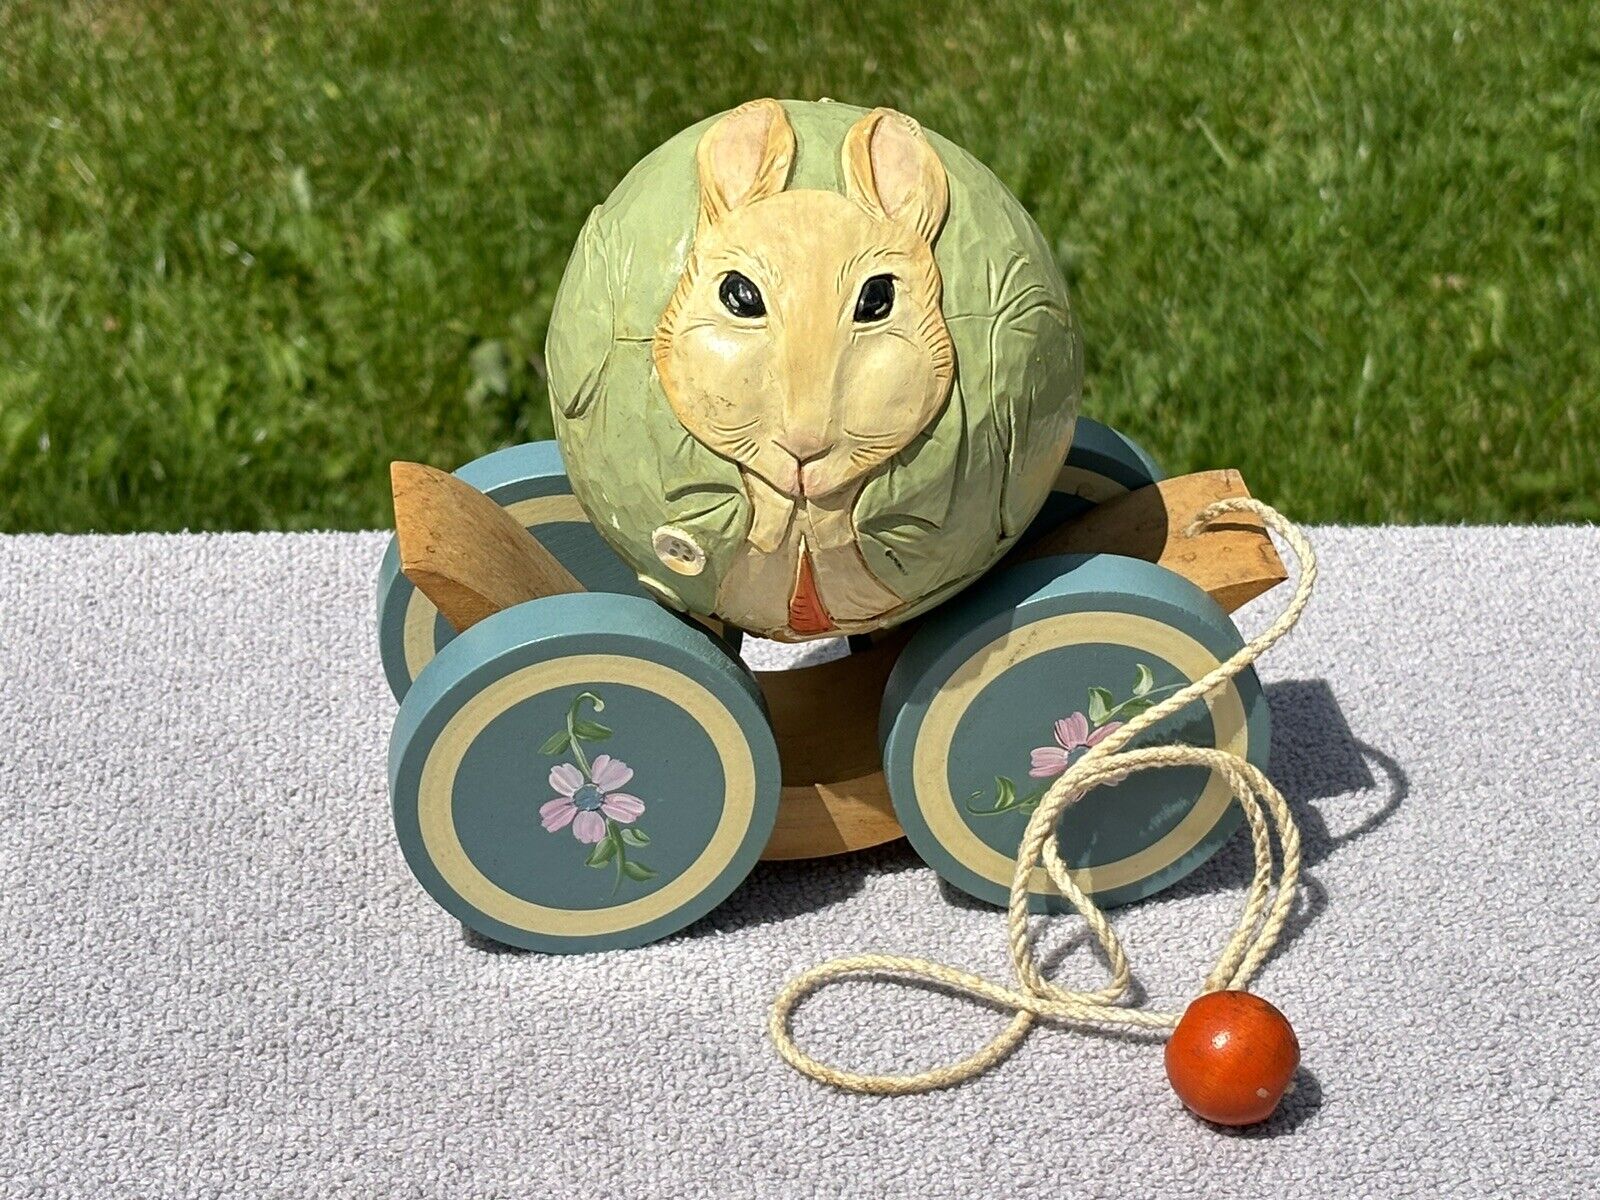 BRIERE Folk Art Pull Toy 1993 Dressed In Suit Bunny Rabbit & Cart